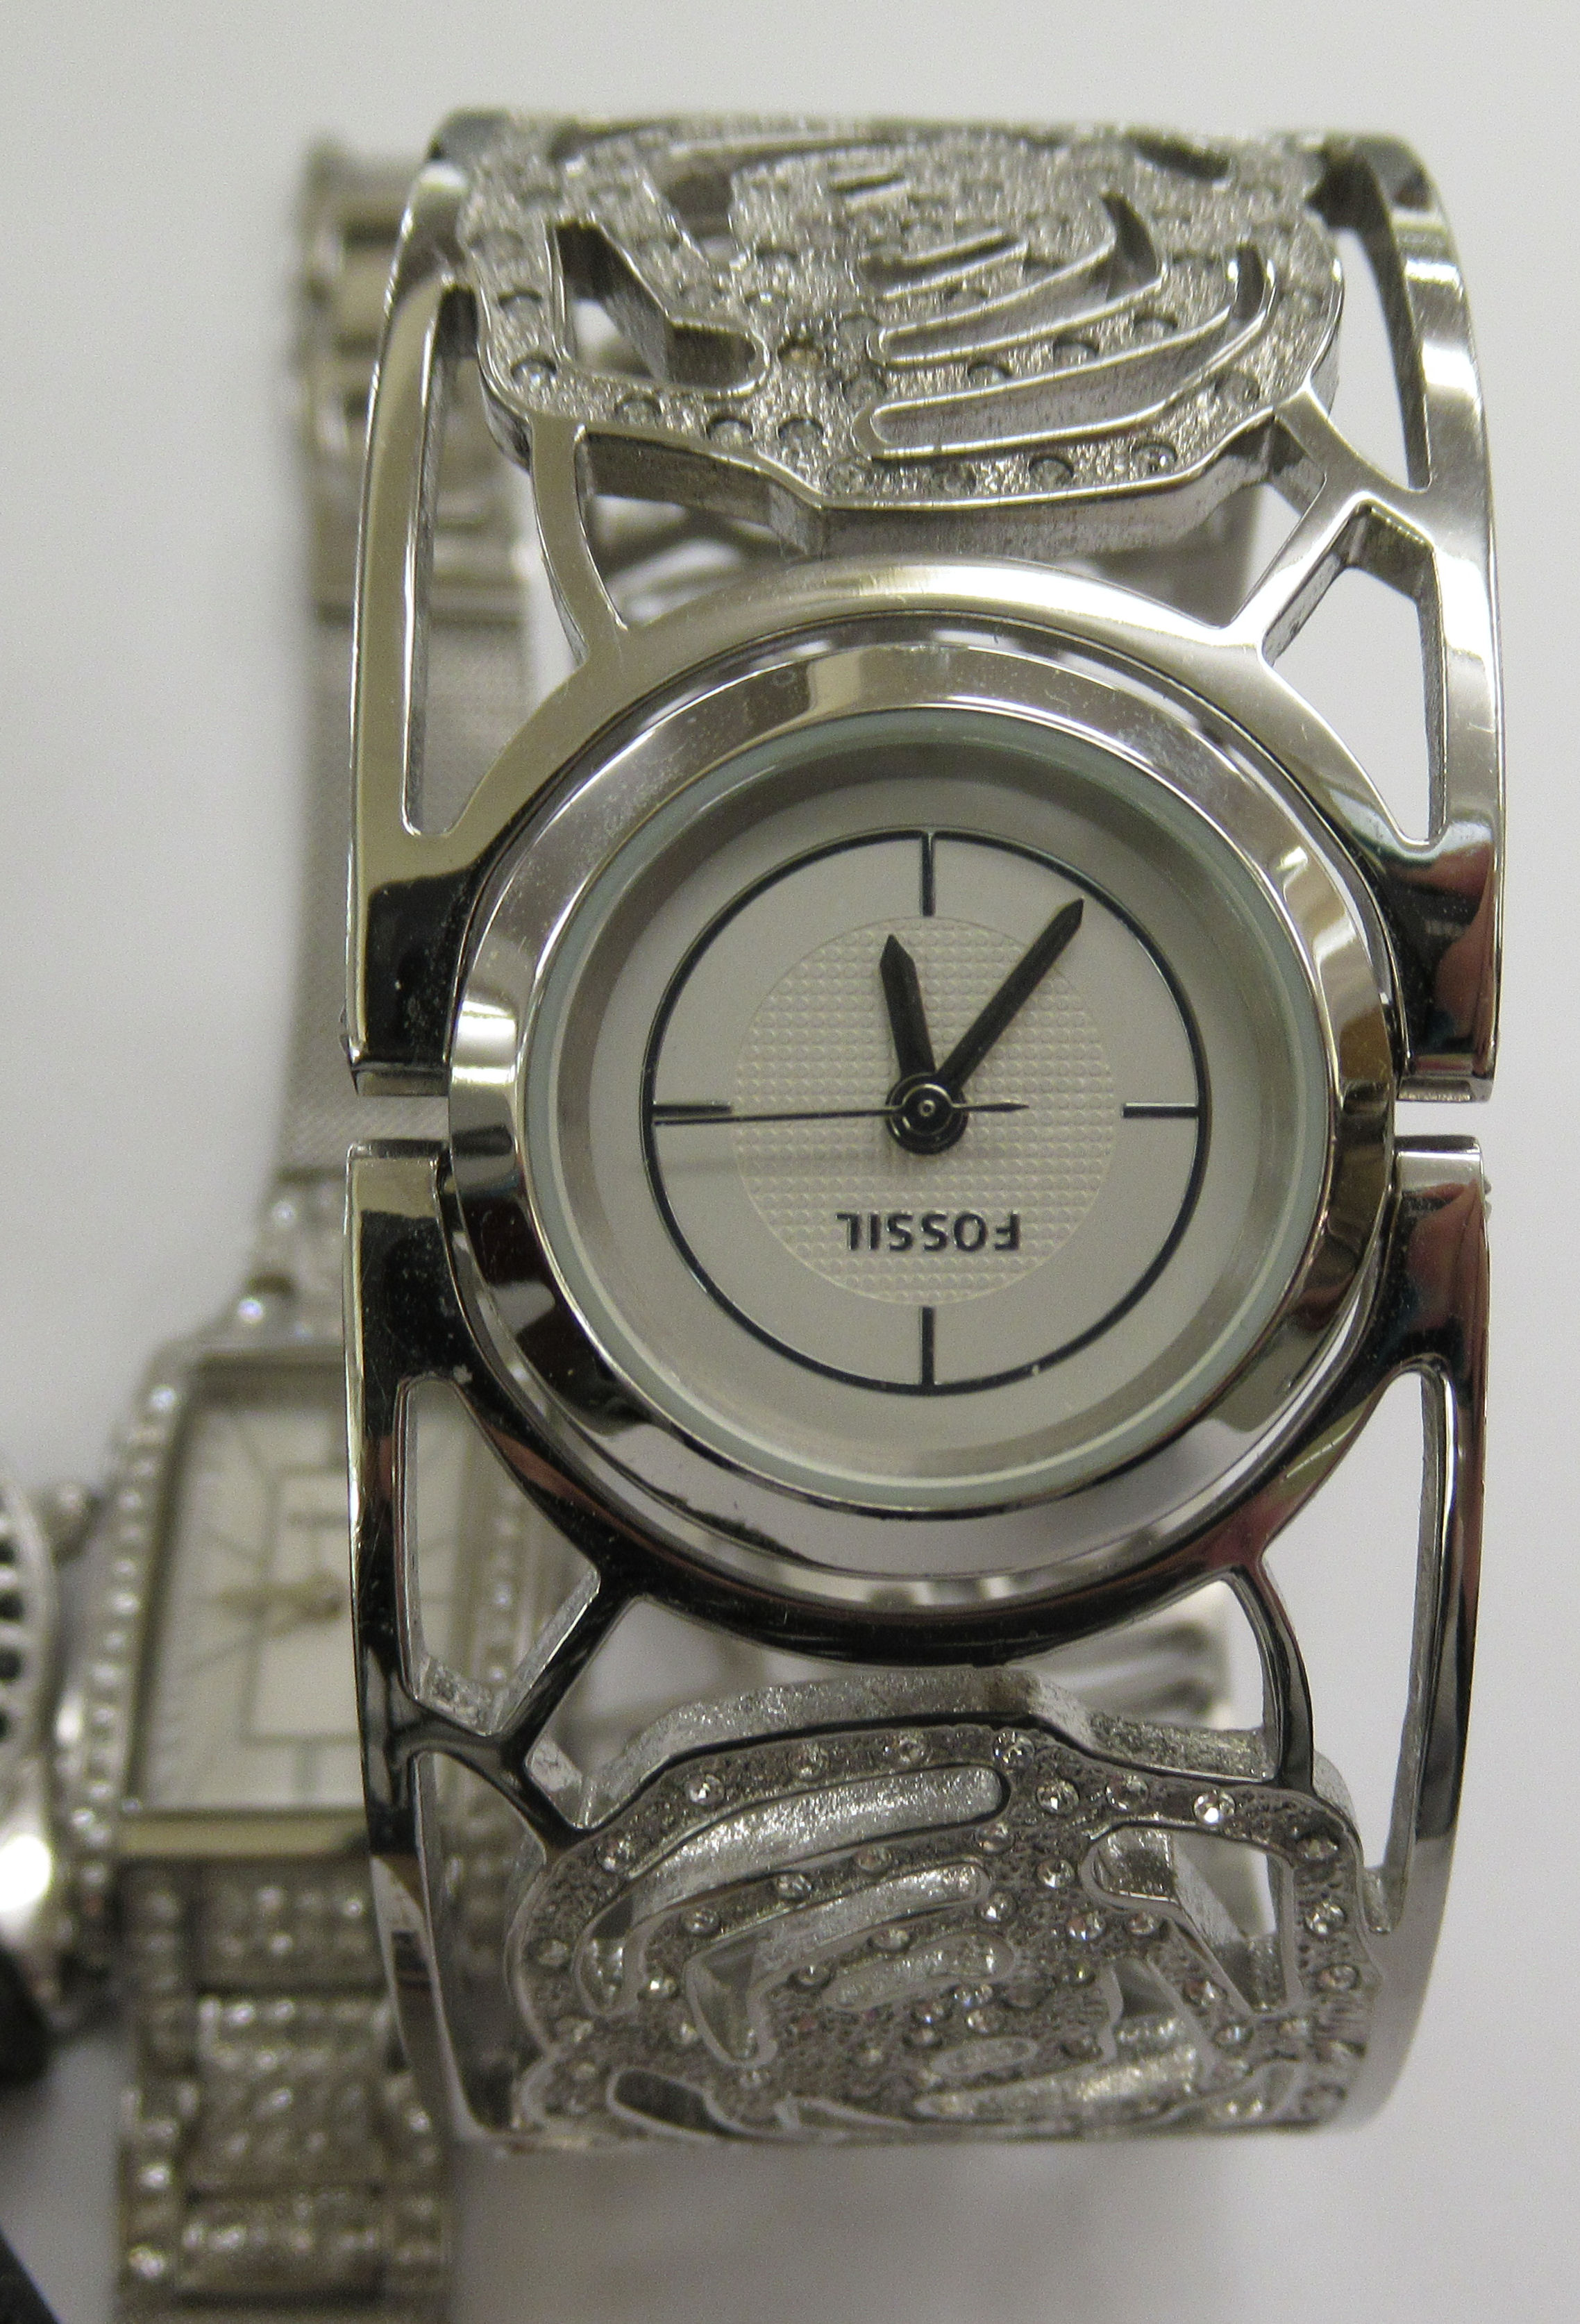 Ladies wristwatches: to include a stainless steel cased fossil bracelet watch with a baton dial - Image 5 of 5